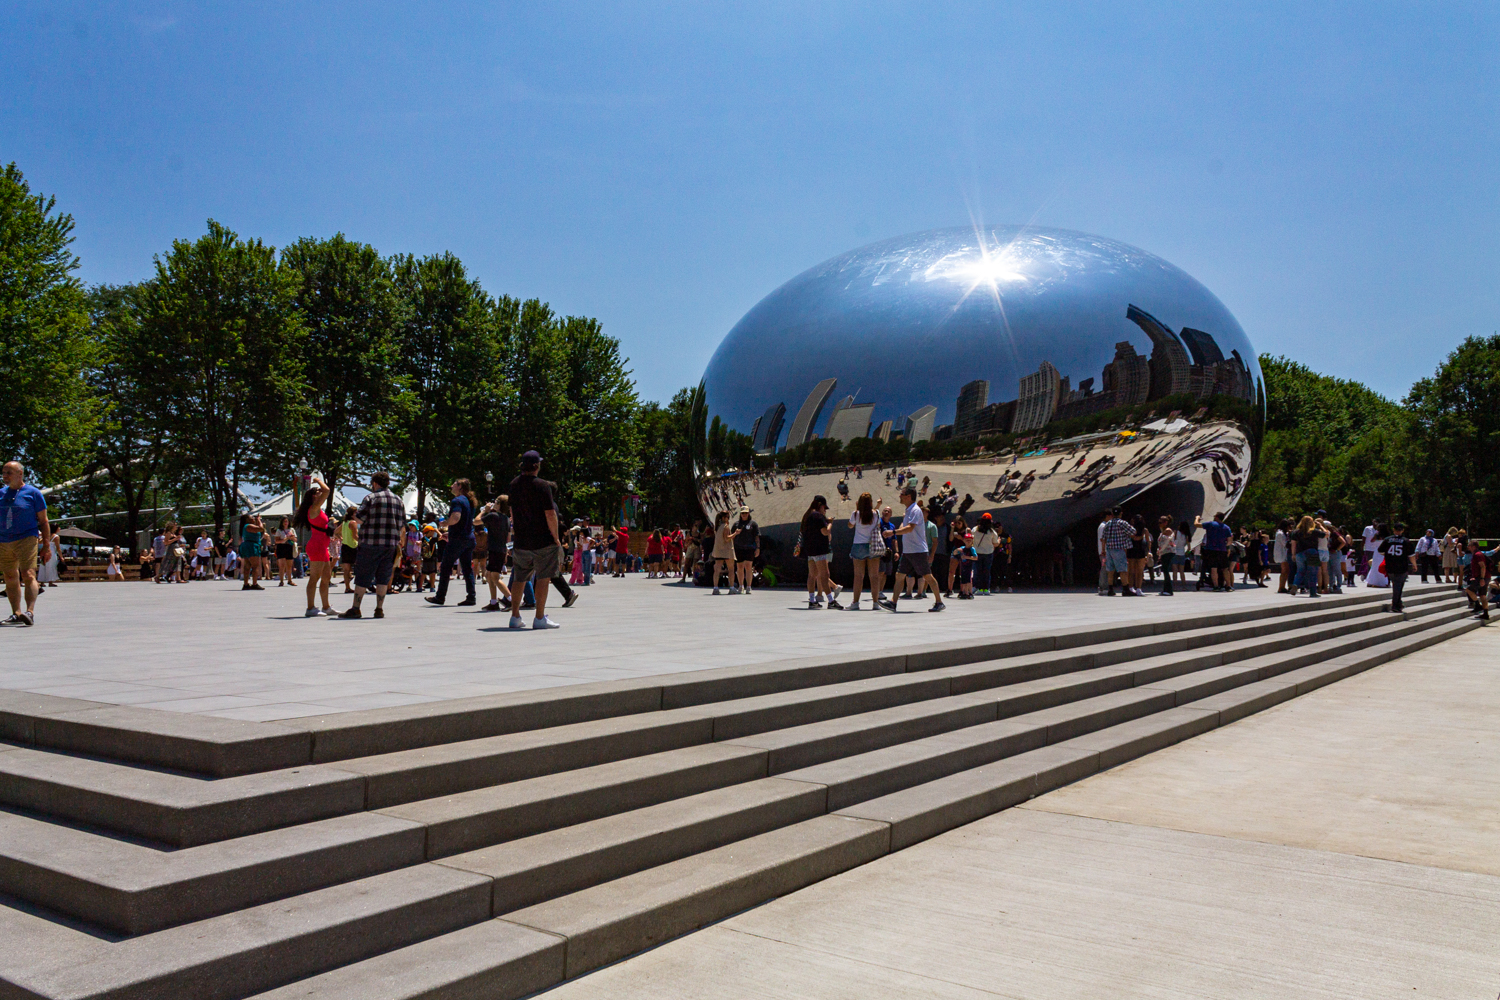 The Bean reopening